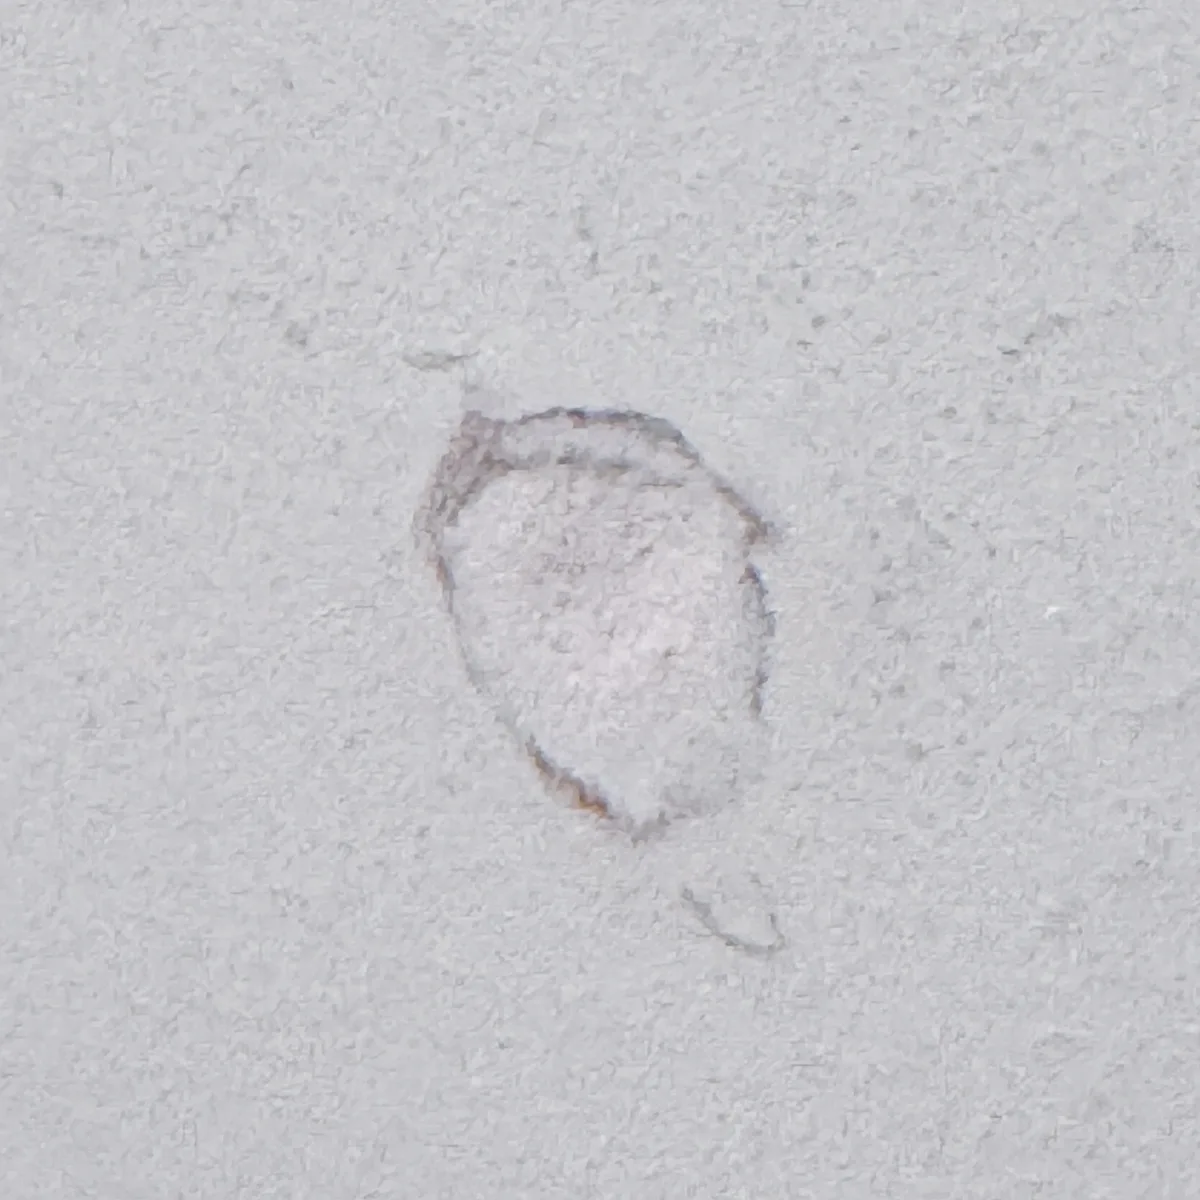 spackle shrunk into the hole